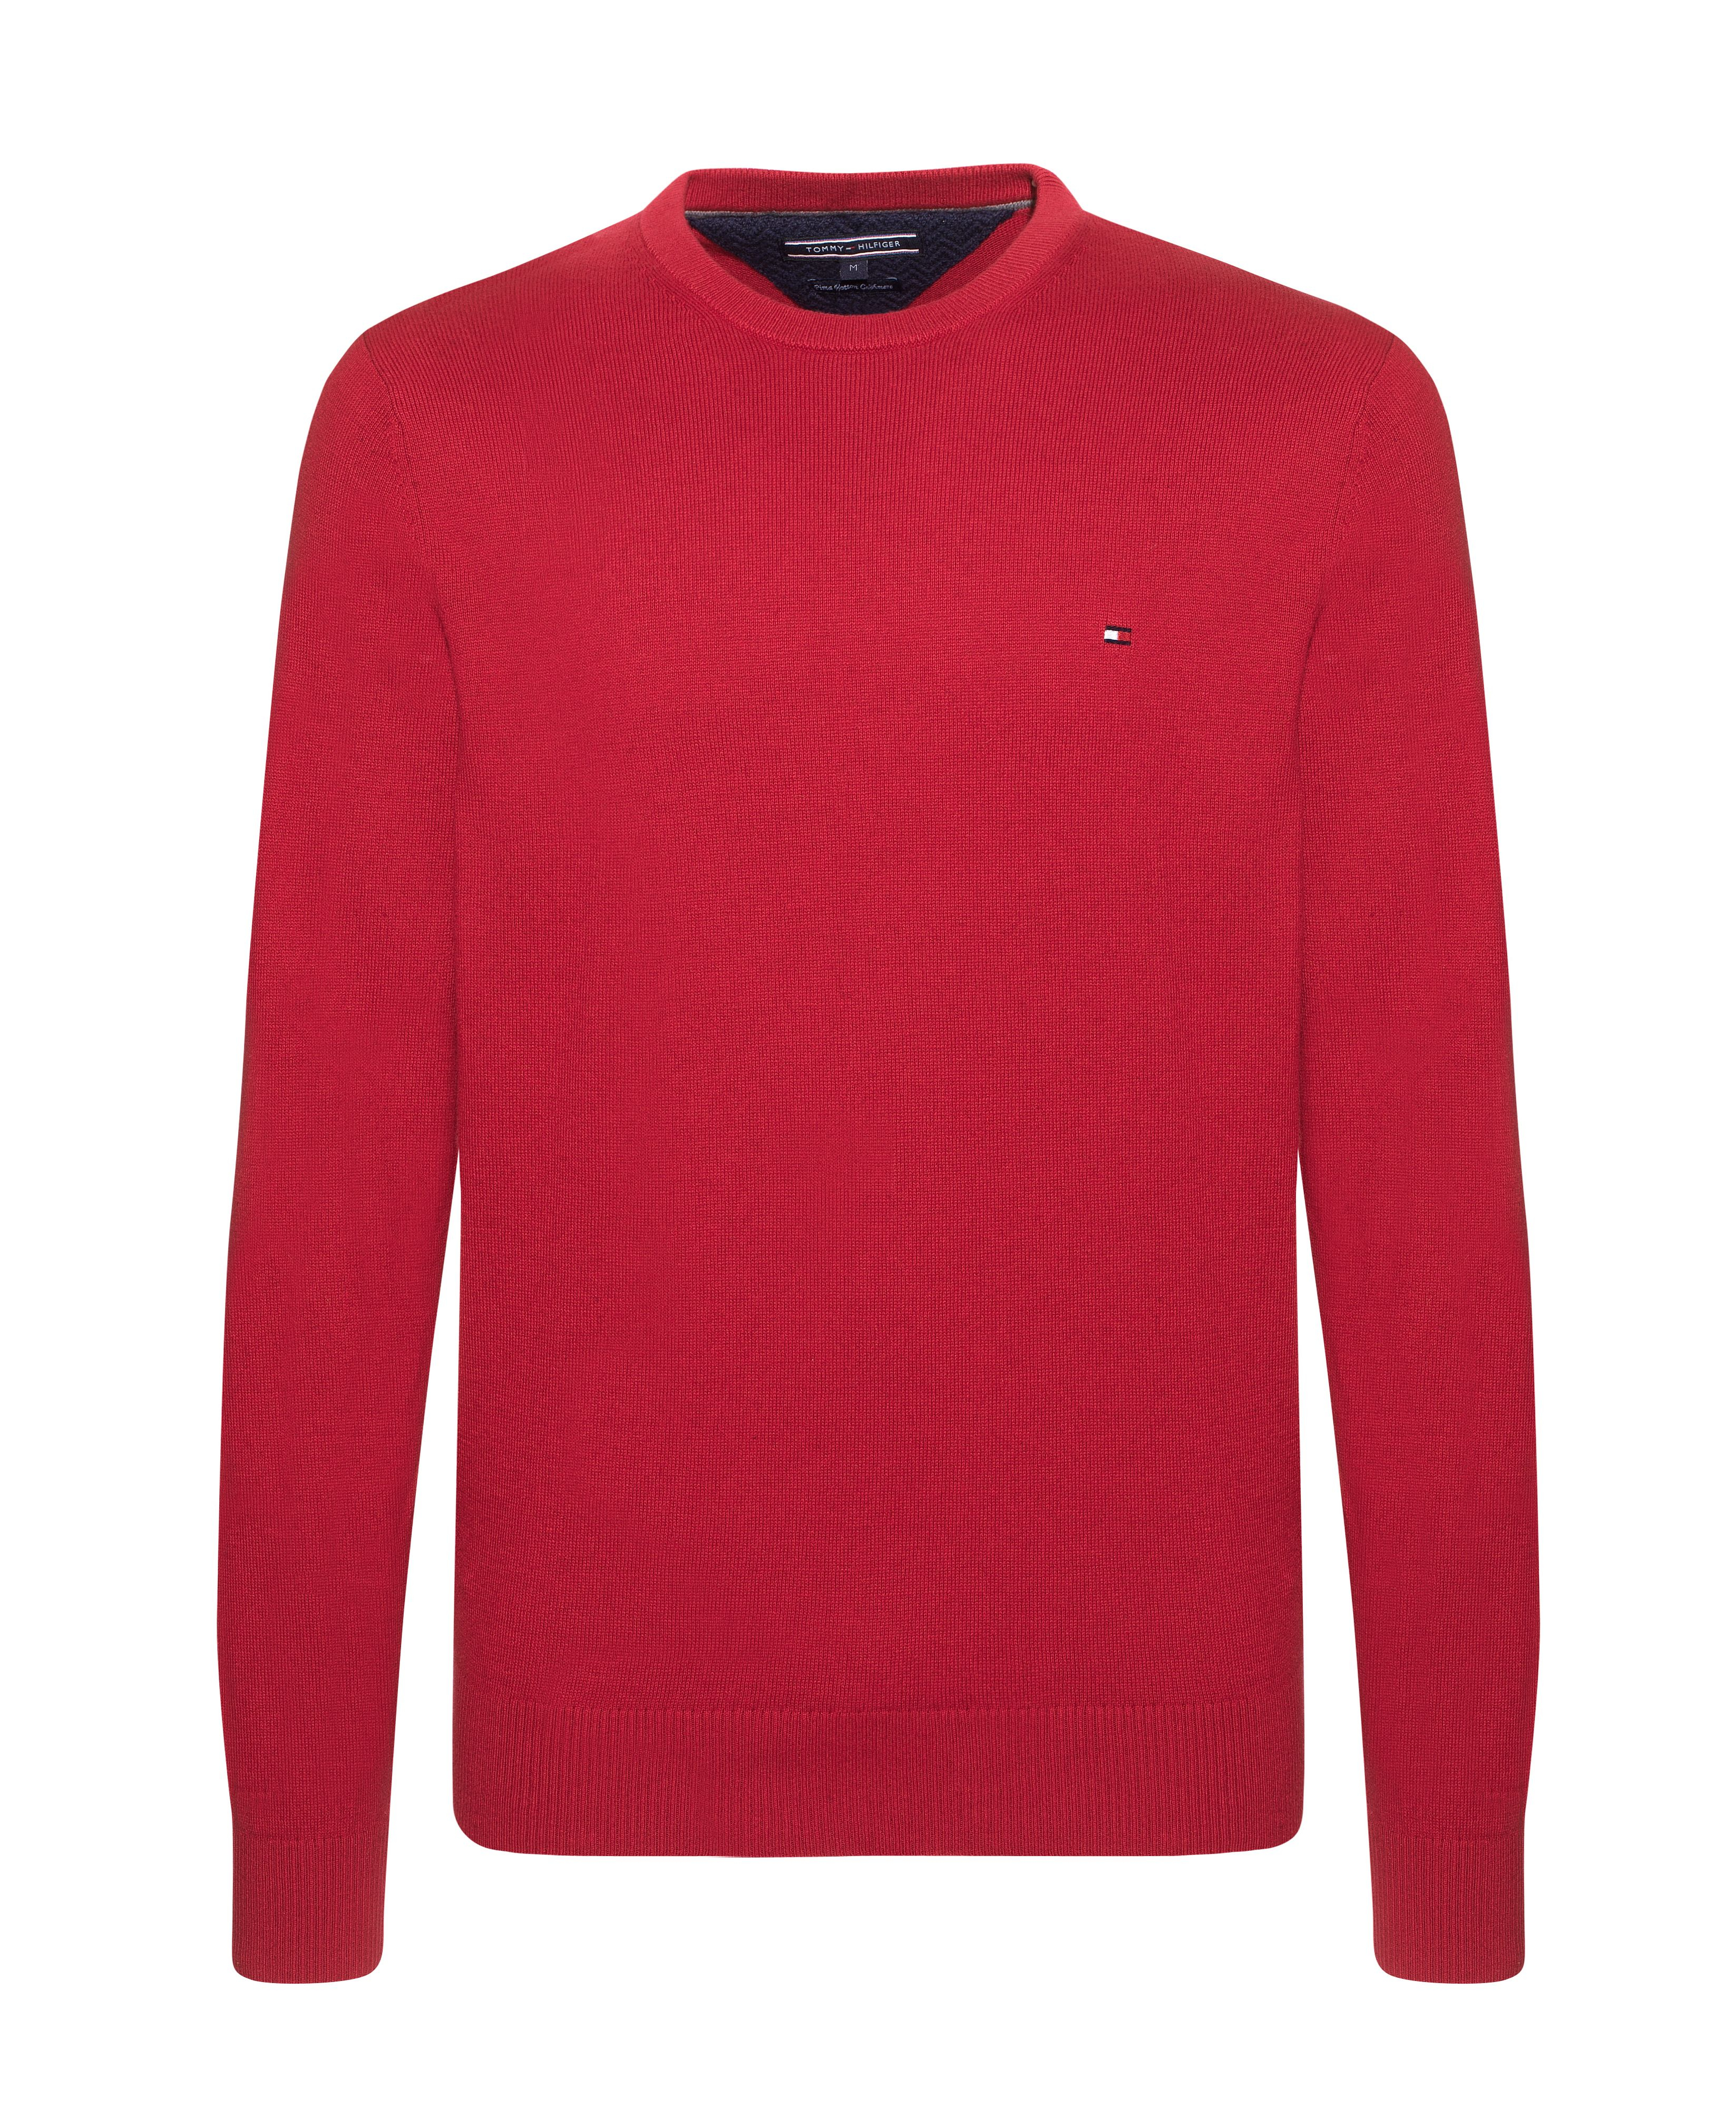 Tommy hilfiger Pima Cotton Cashmere Crew-neck Sweater in Red for Men | Lyst